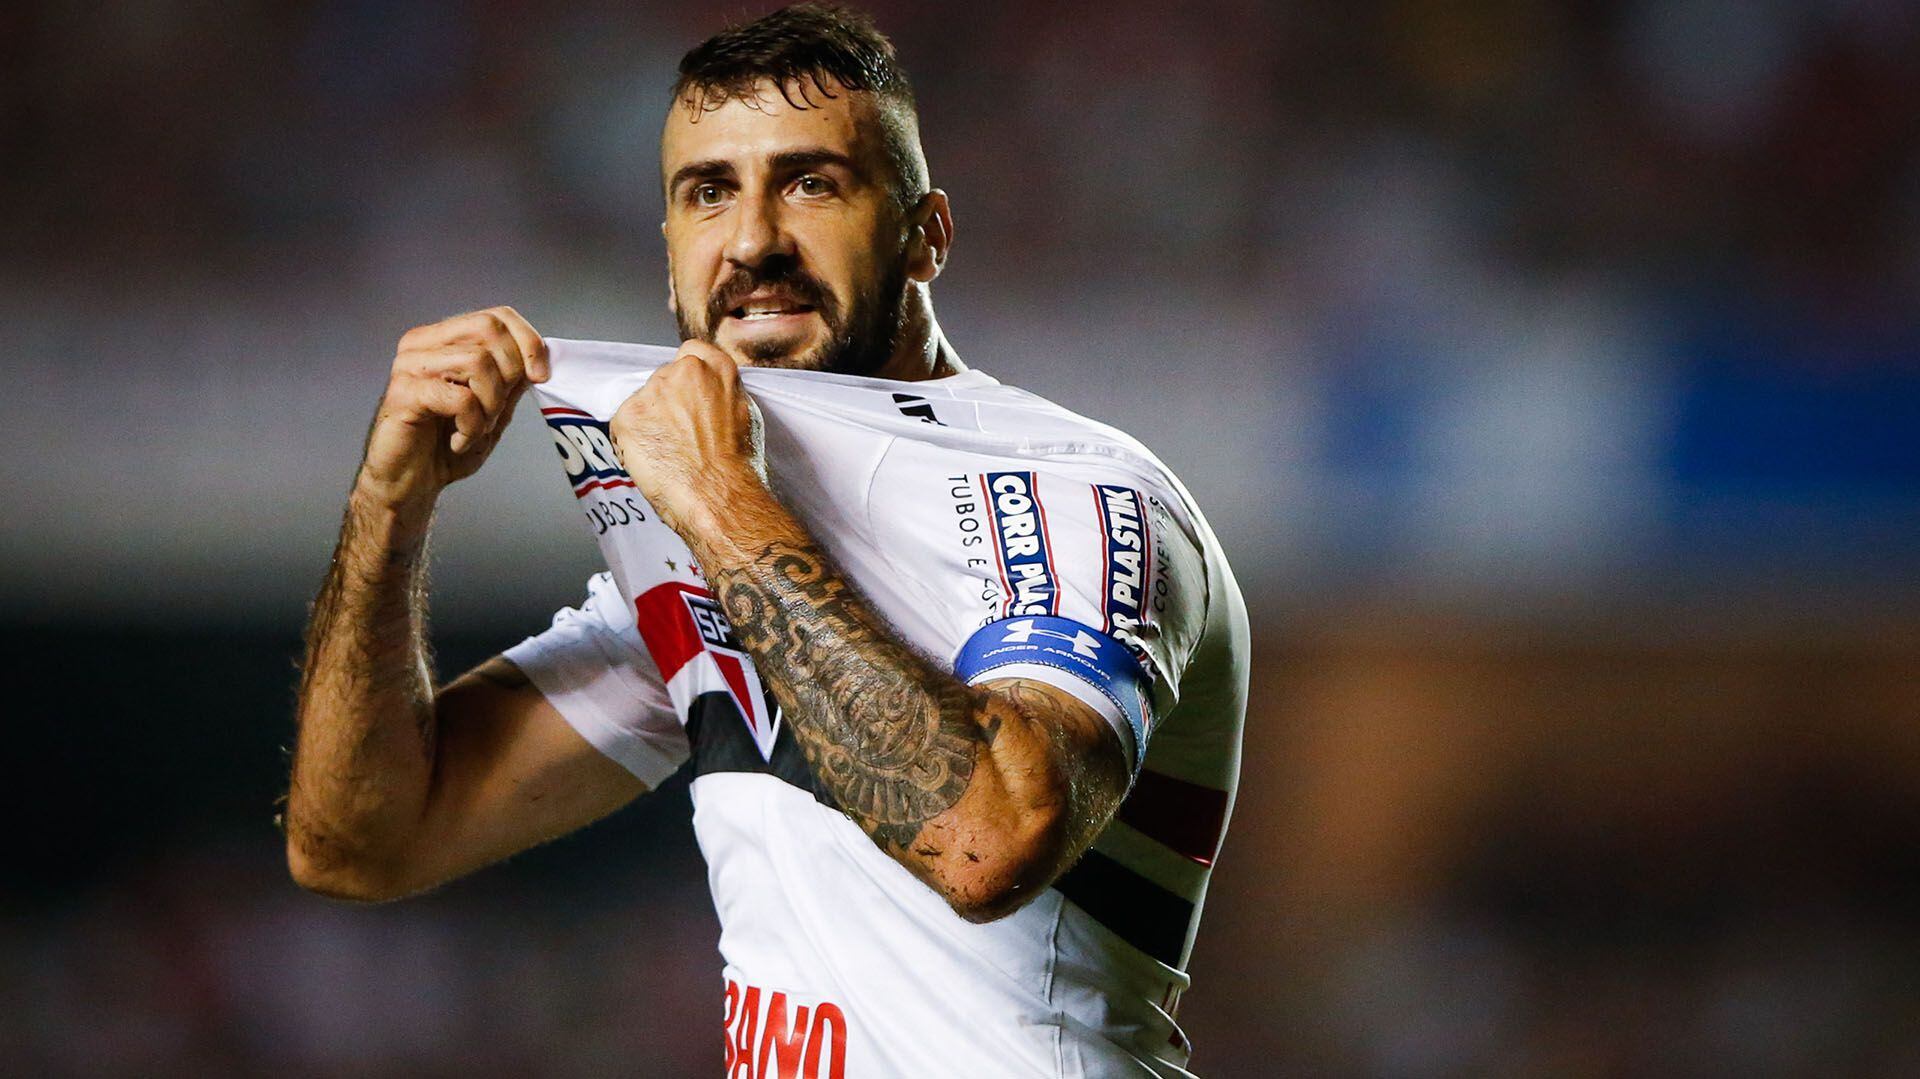 SAO PAULO, BRAZIL – MAY 27: Lucas Pratto of Sao Paulo in action during the match between Sao Paulo and Palmeiras for the Brasileirao Series A 2017 at Morumbi stadium on May 27, 2017 in Sao Paulo, Brazil. (Photo by Alexandre Schneider/Getty Images)